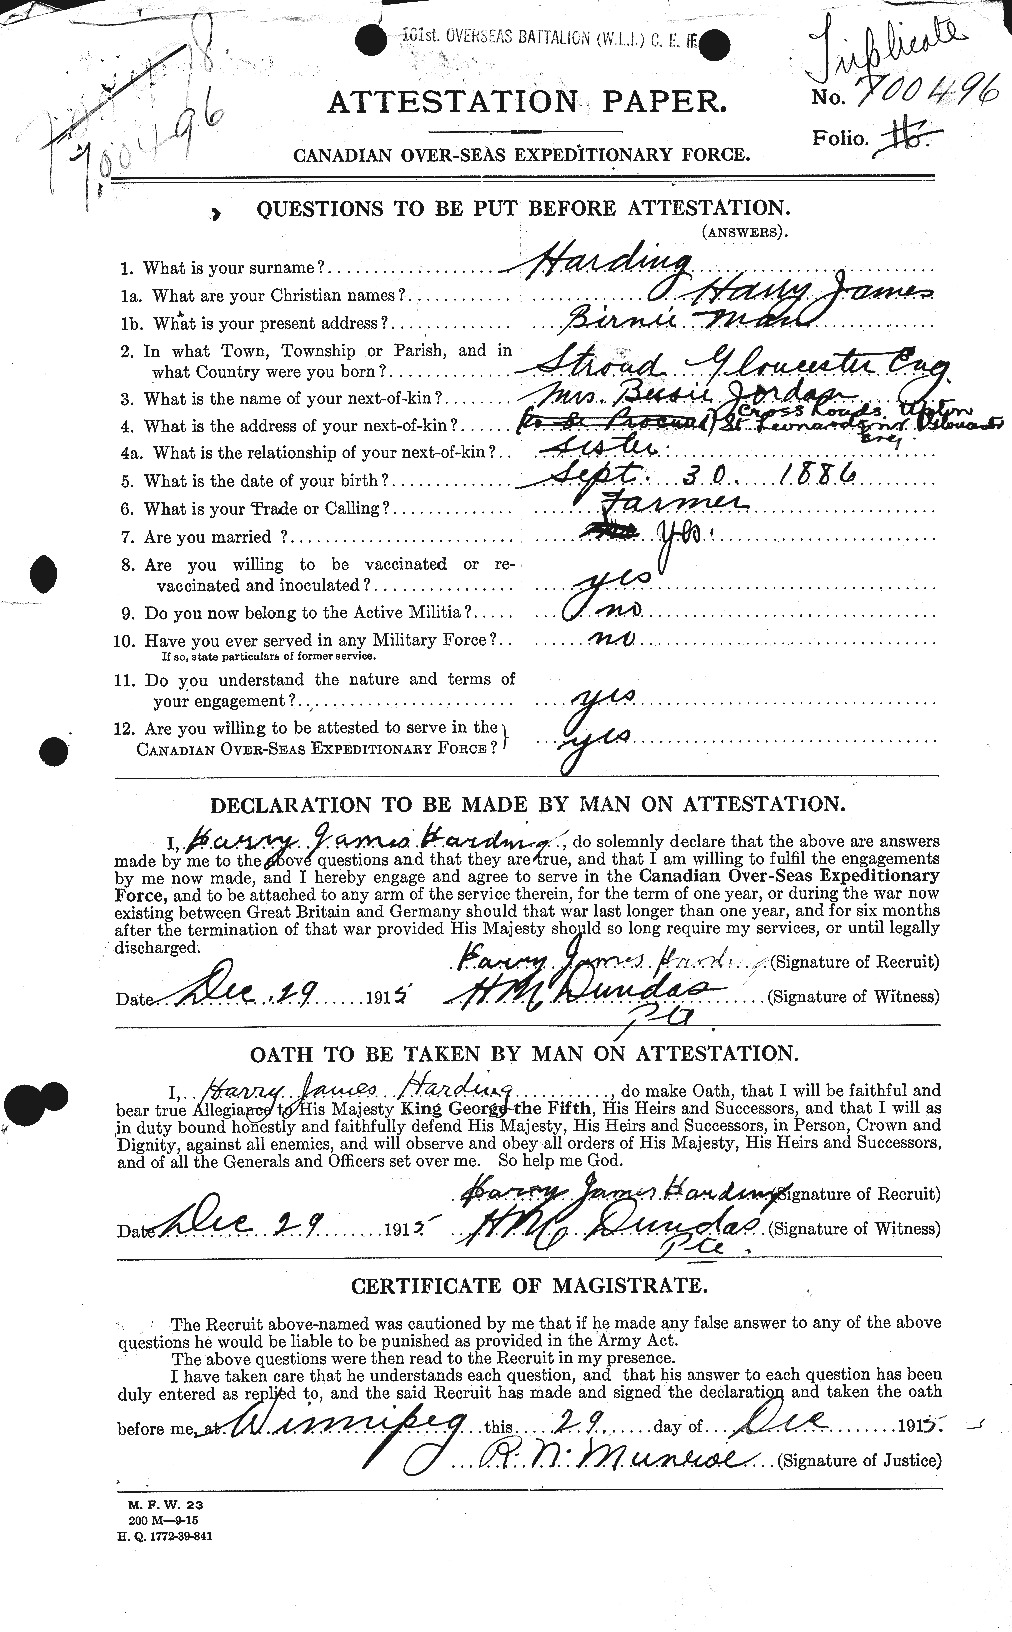 Personnel Records of the First World War - CEF 379665a